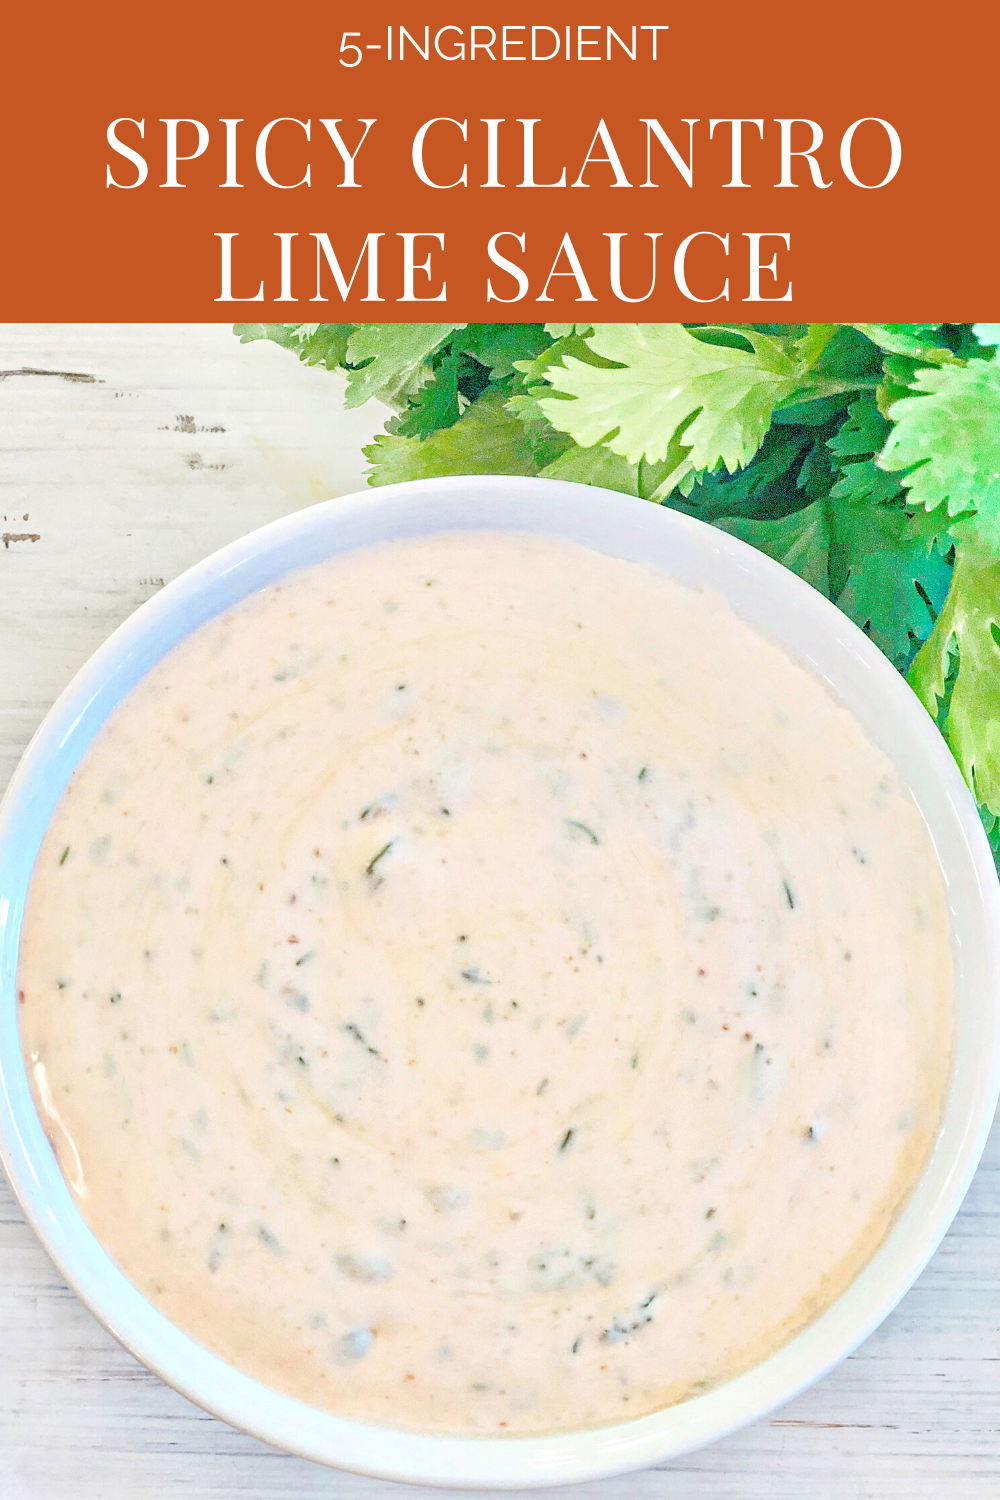 Only five simple ingredients and about 5 minutes are all you need. This creamy and delicious dressing is perfect for drizzling over tacos, enchiladas, salads, burrito bowls, and even makes a great dip for chips, too! | thiswifecooks.com via @thiswifecooks